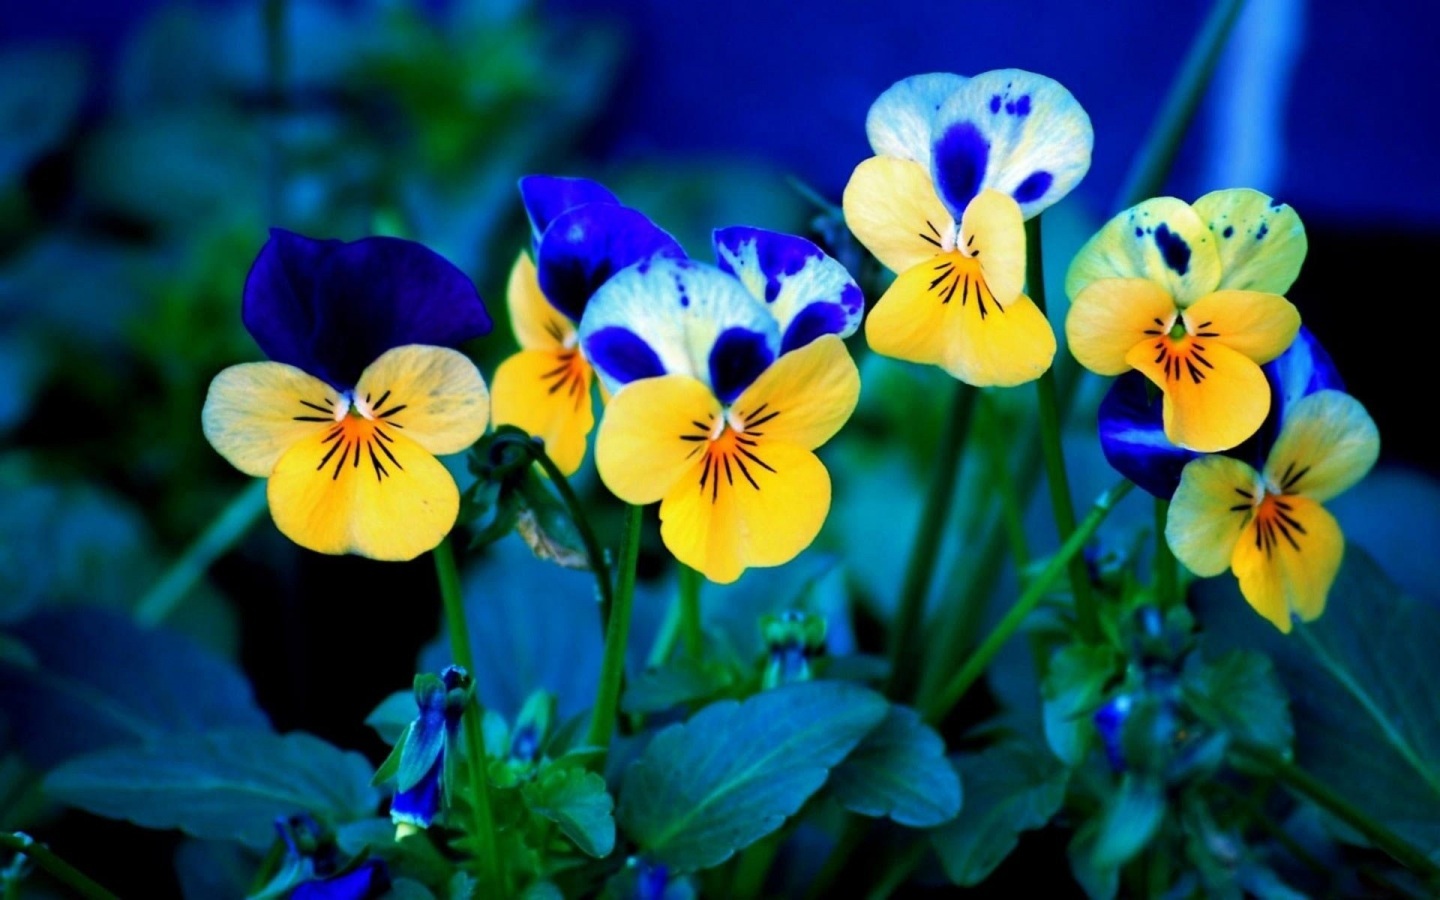 Im Genes Blue Yellow Flower Colors Summer In Night City Park Cool